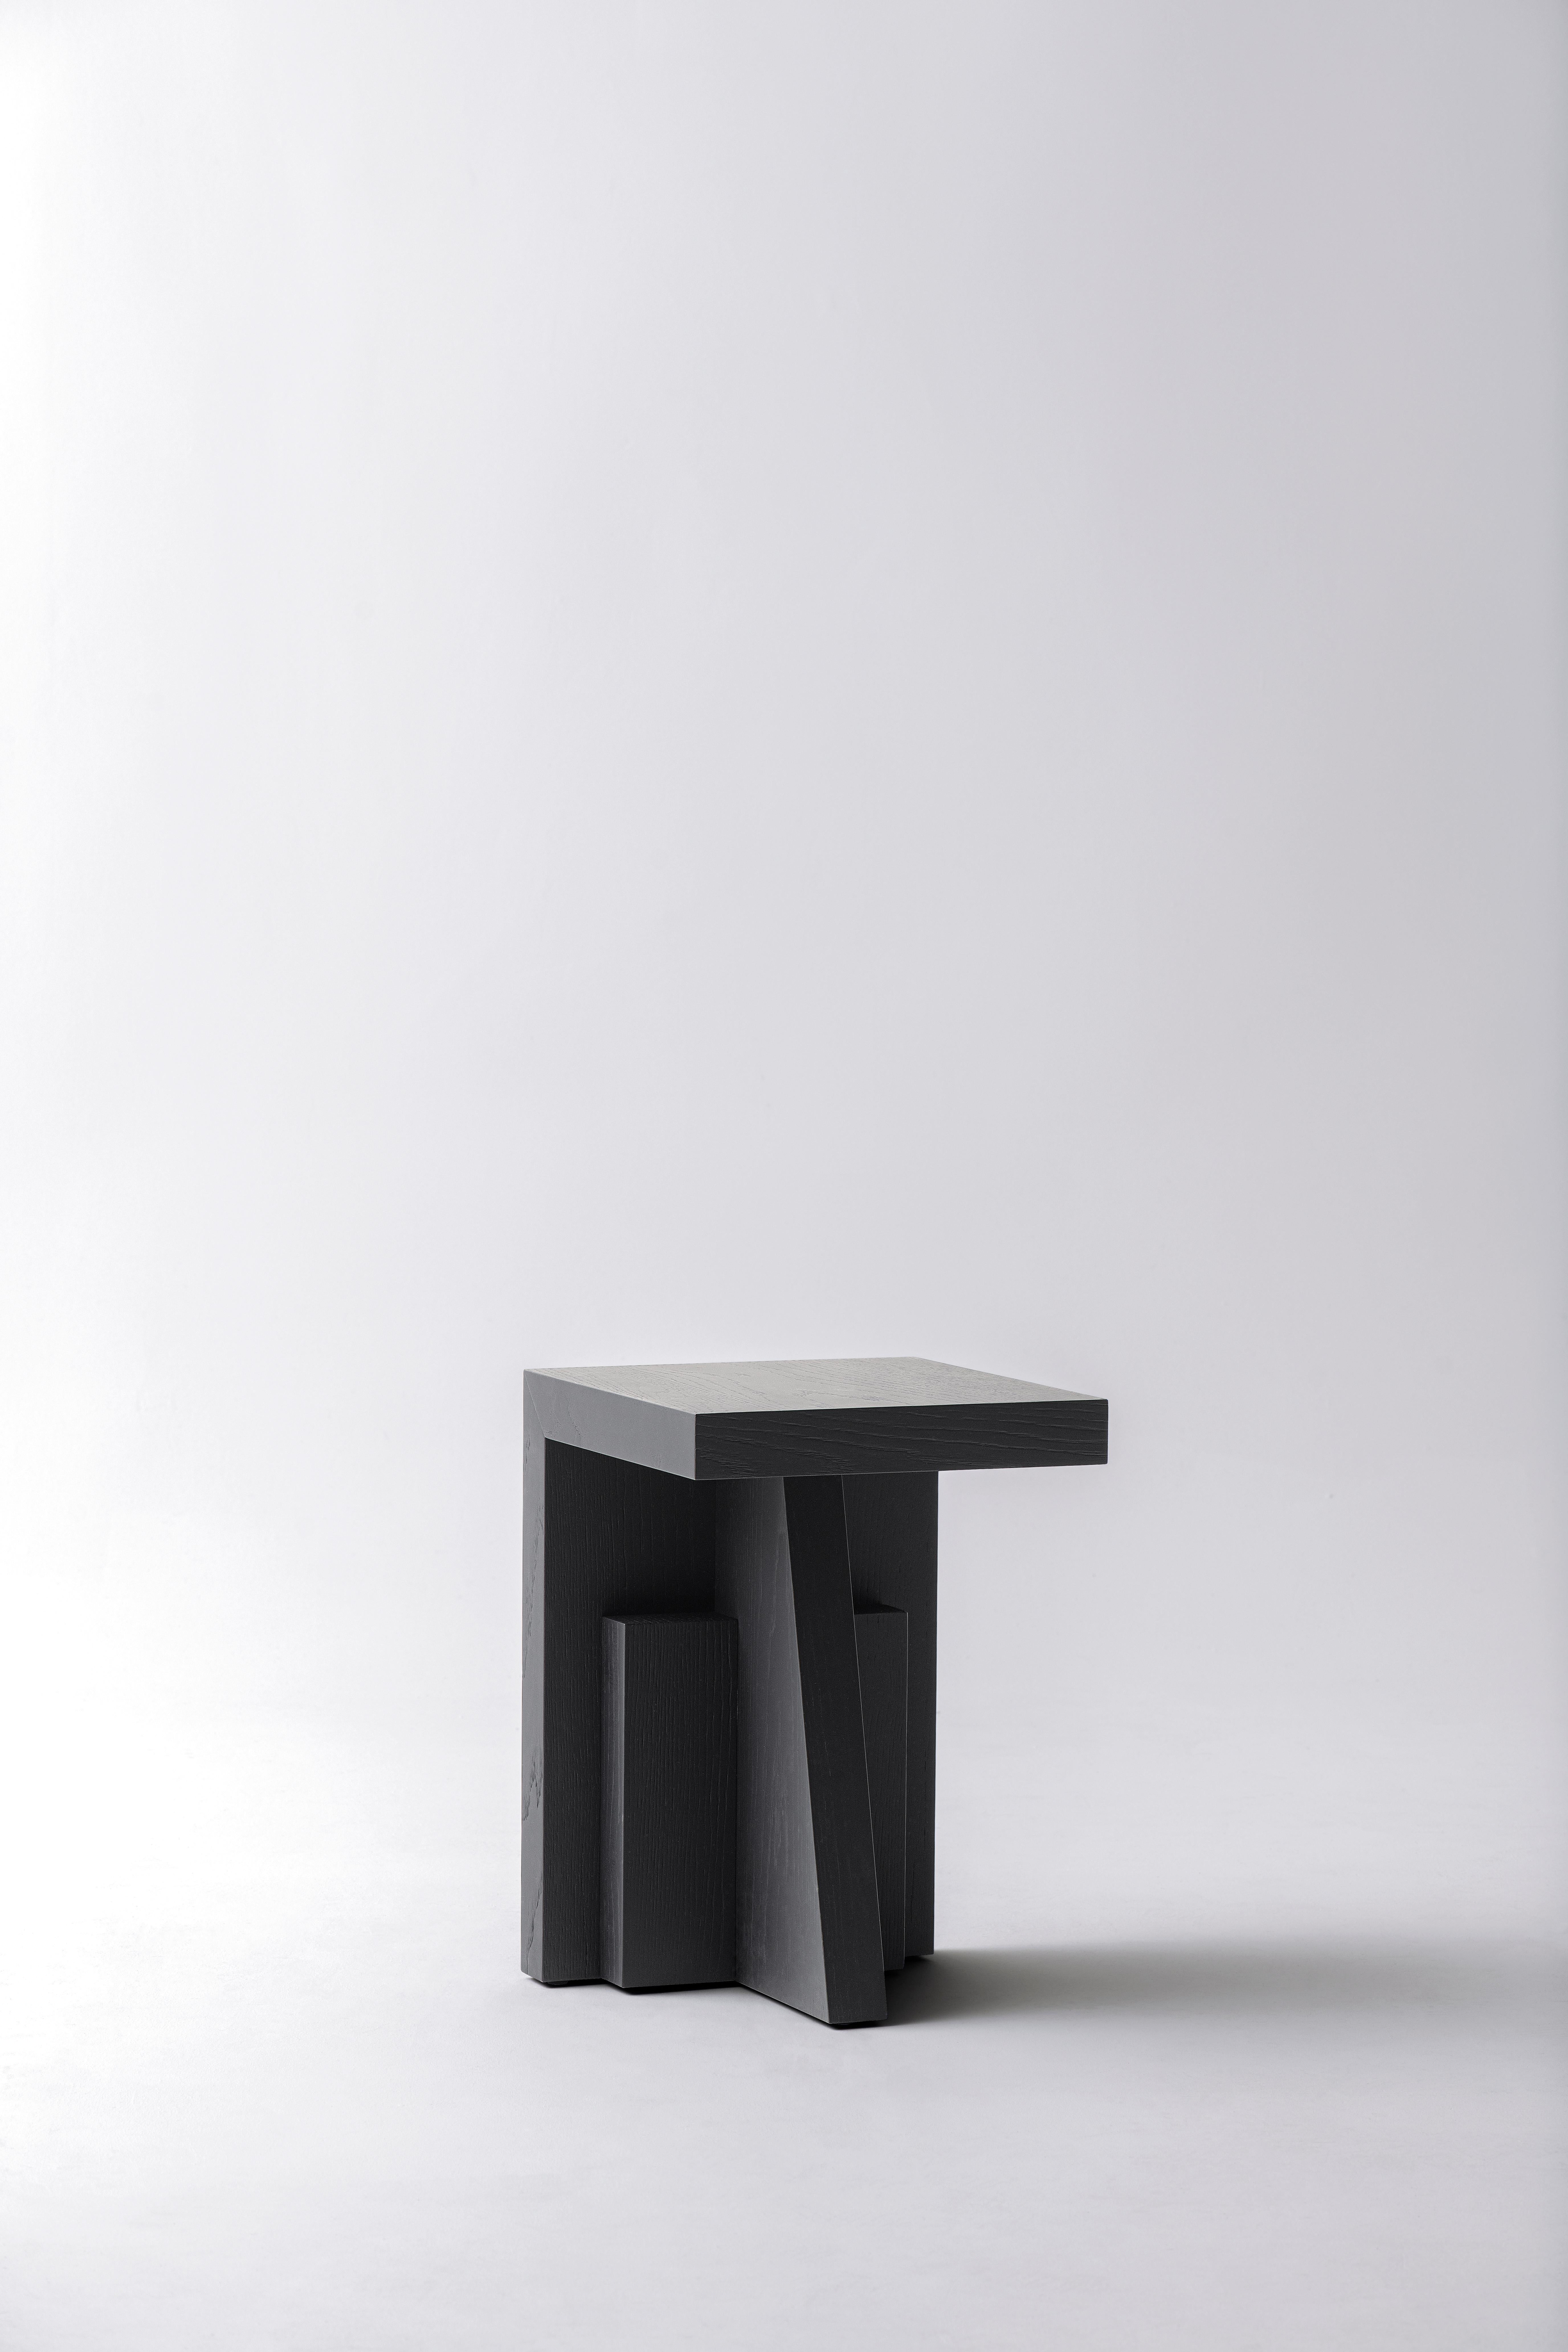 Black ash side table wolf sculpted by Lupo Horio¯kami
Dimensions: D 38 x W 43 x H 50 cm
Materials: Black ashwood

“The artwork [...] arises when the mind is willing to accept reality as it was the first time it meets it” (“aesthetics of the